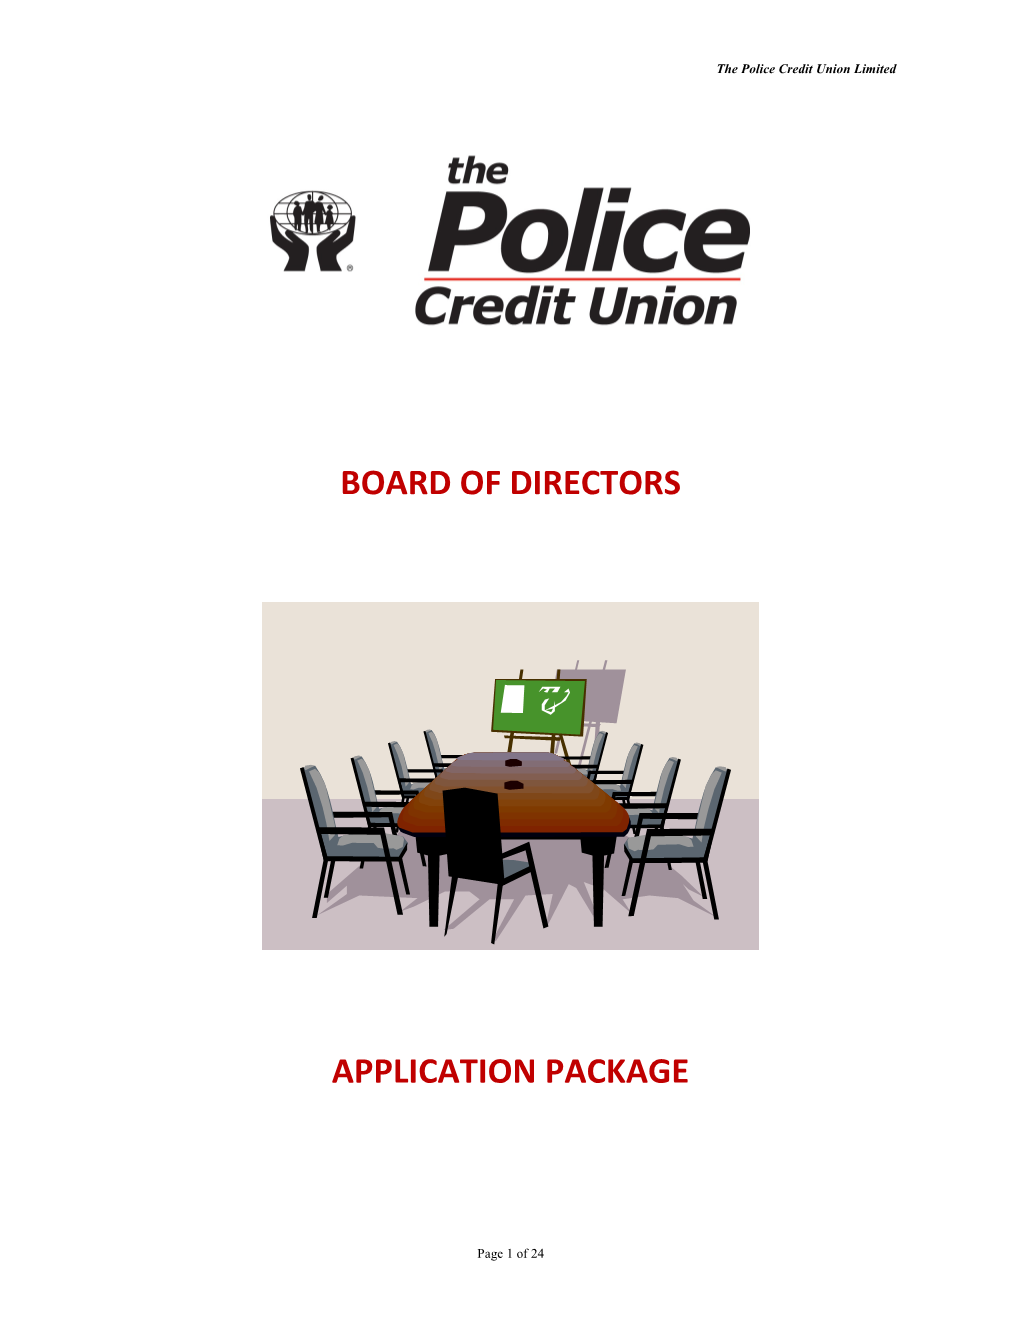 The Police Credit Union Limited